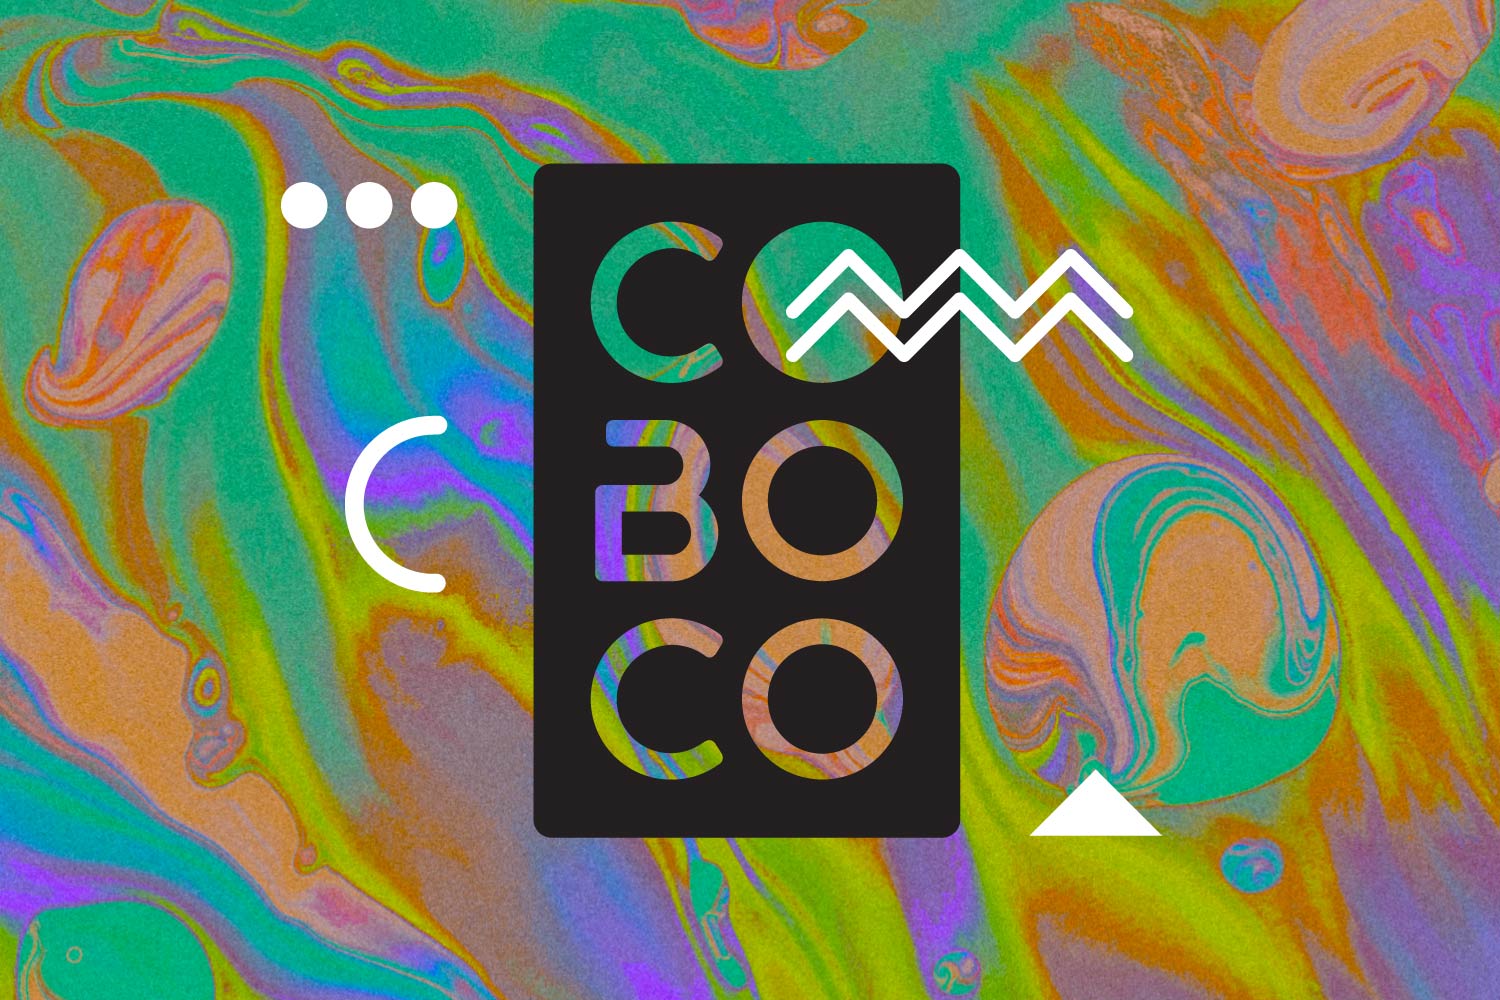 COBOCO logo with colorful background